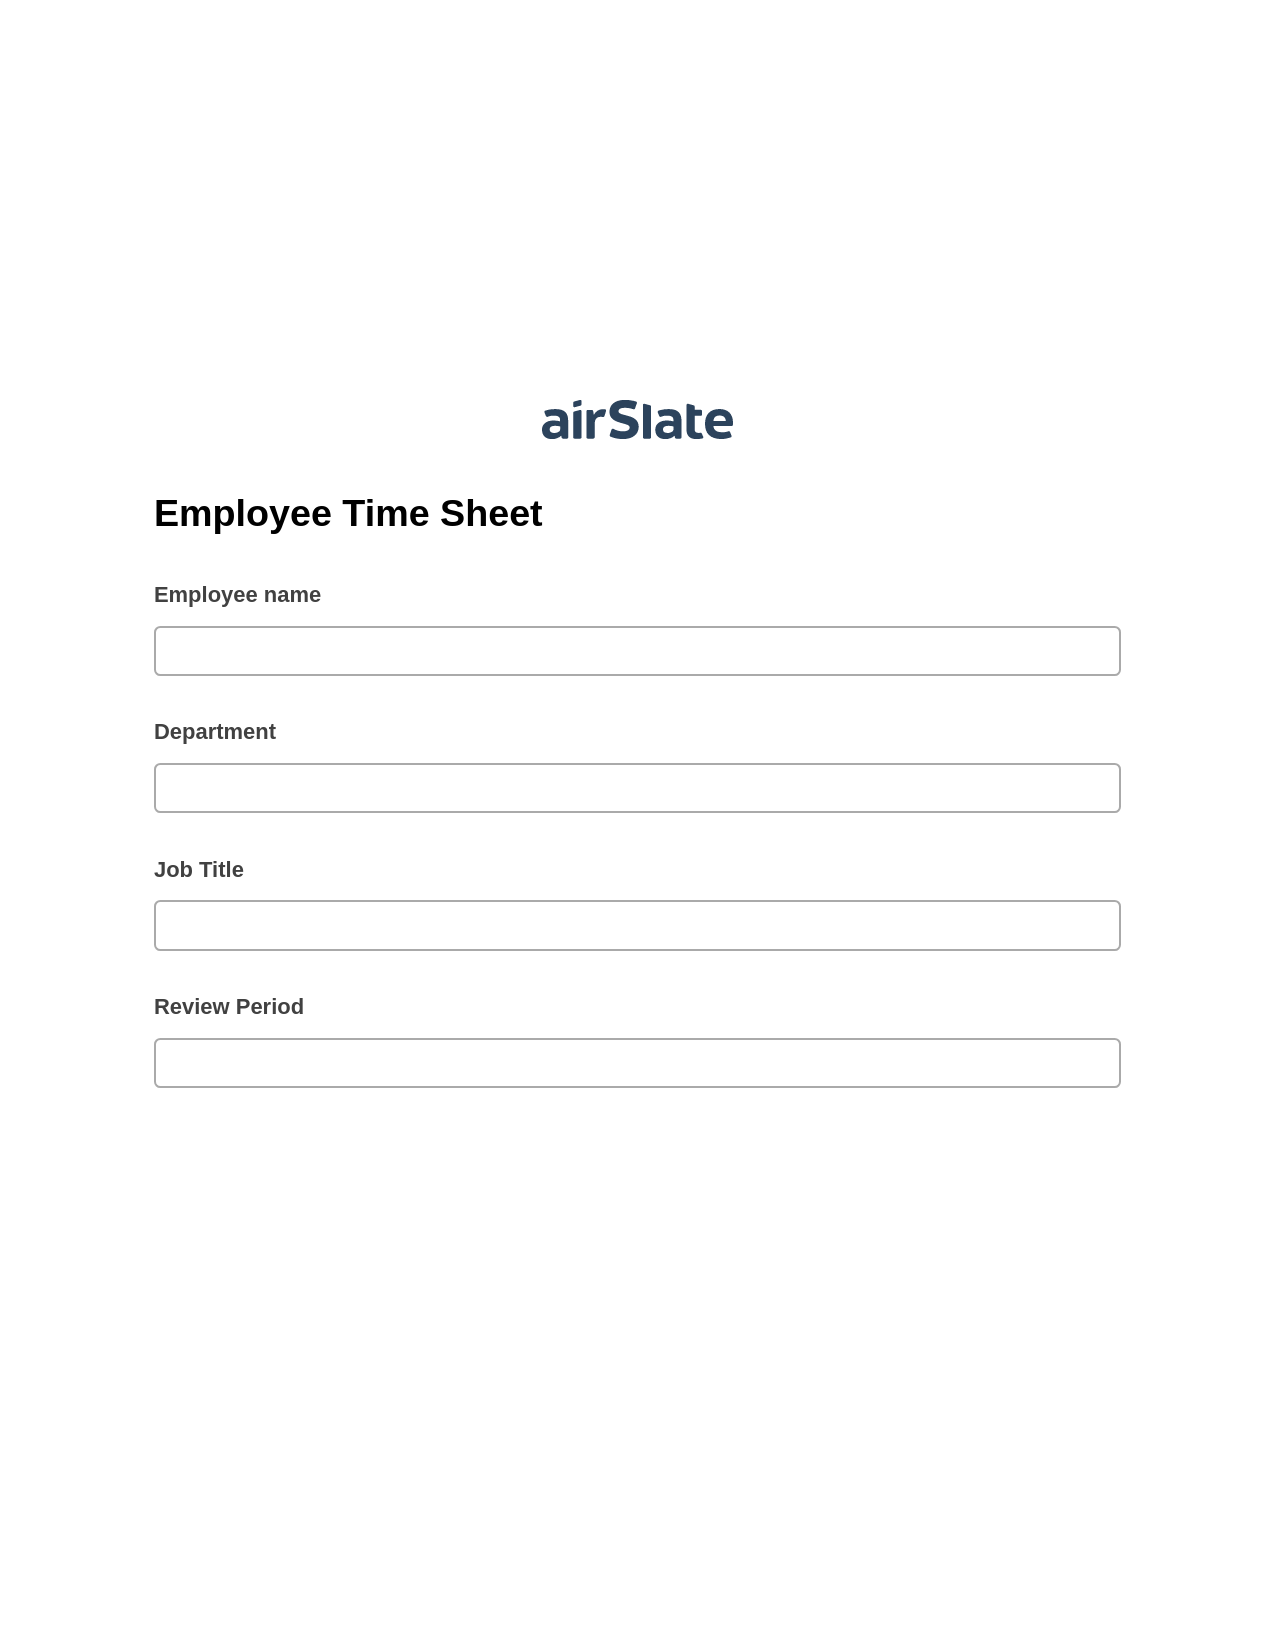 Employee Time Sheet Pre-fill from MS Dynamics 365 Records, Google Cloud Print Bot, Email Notification Postfinish Bot